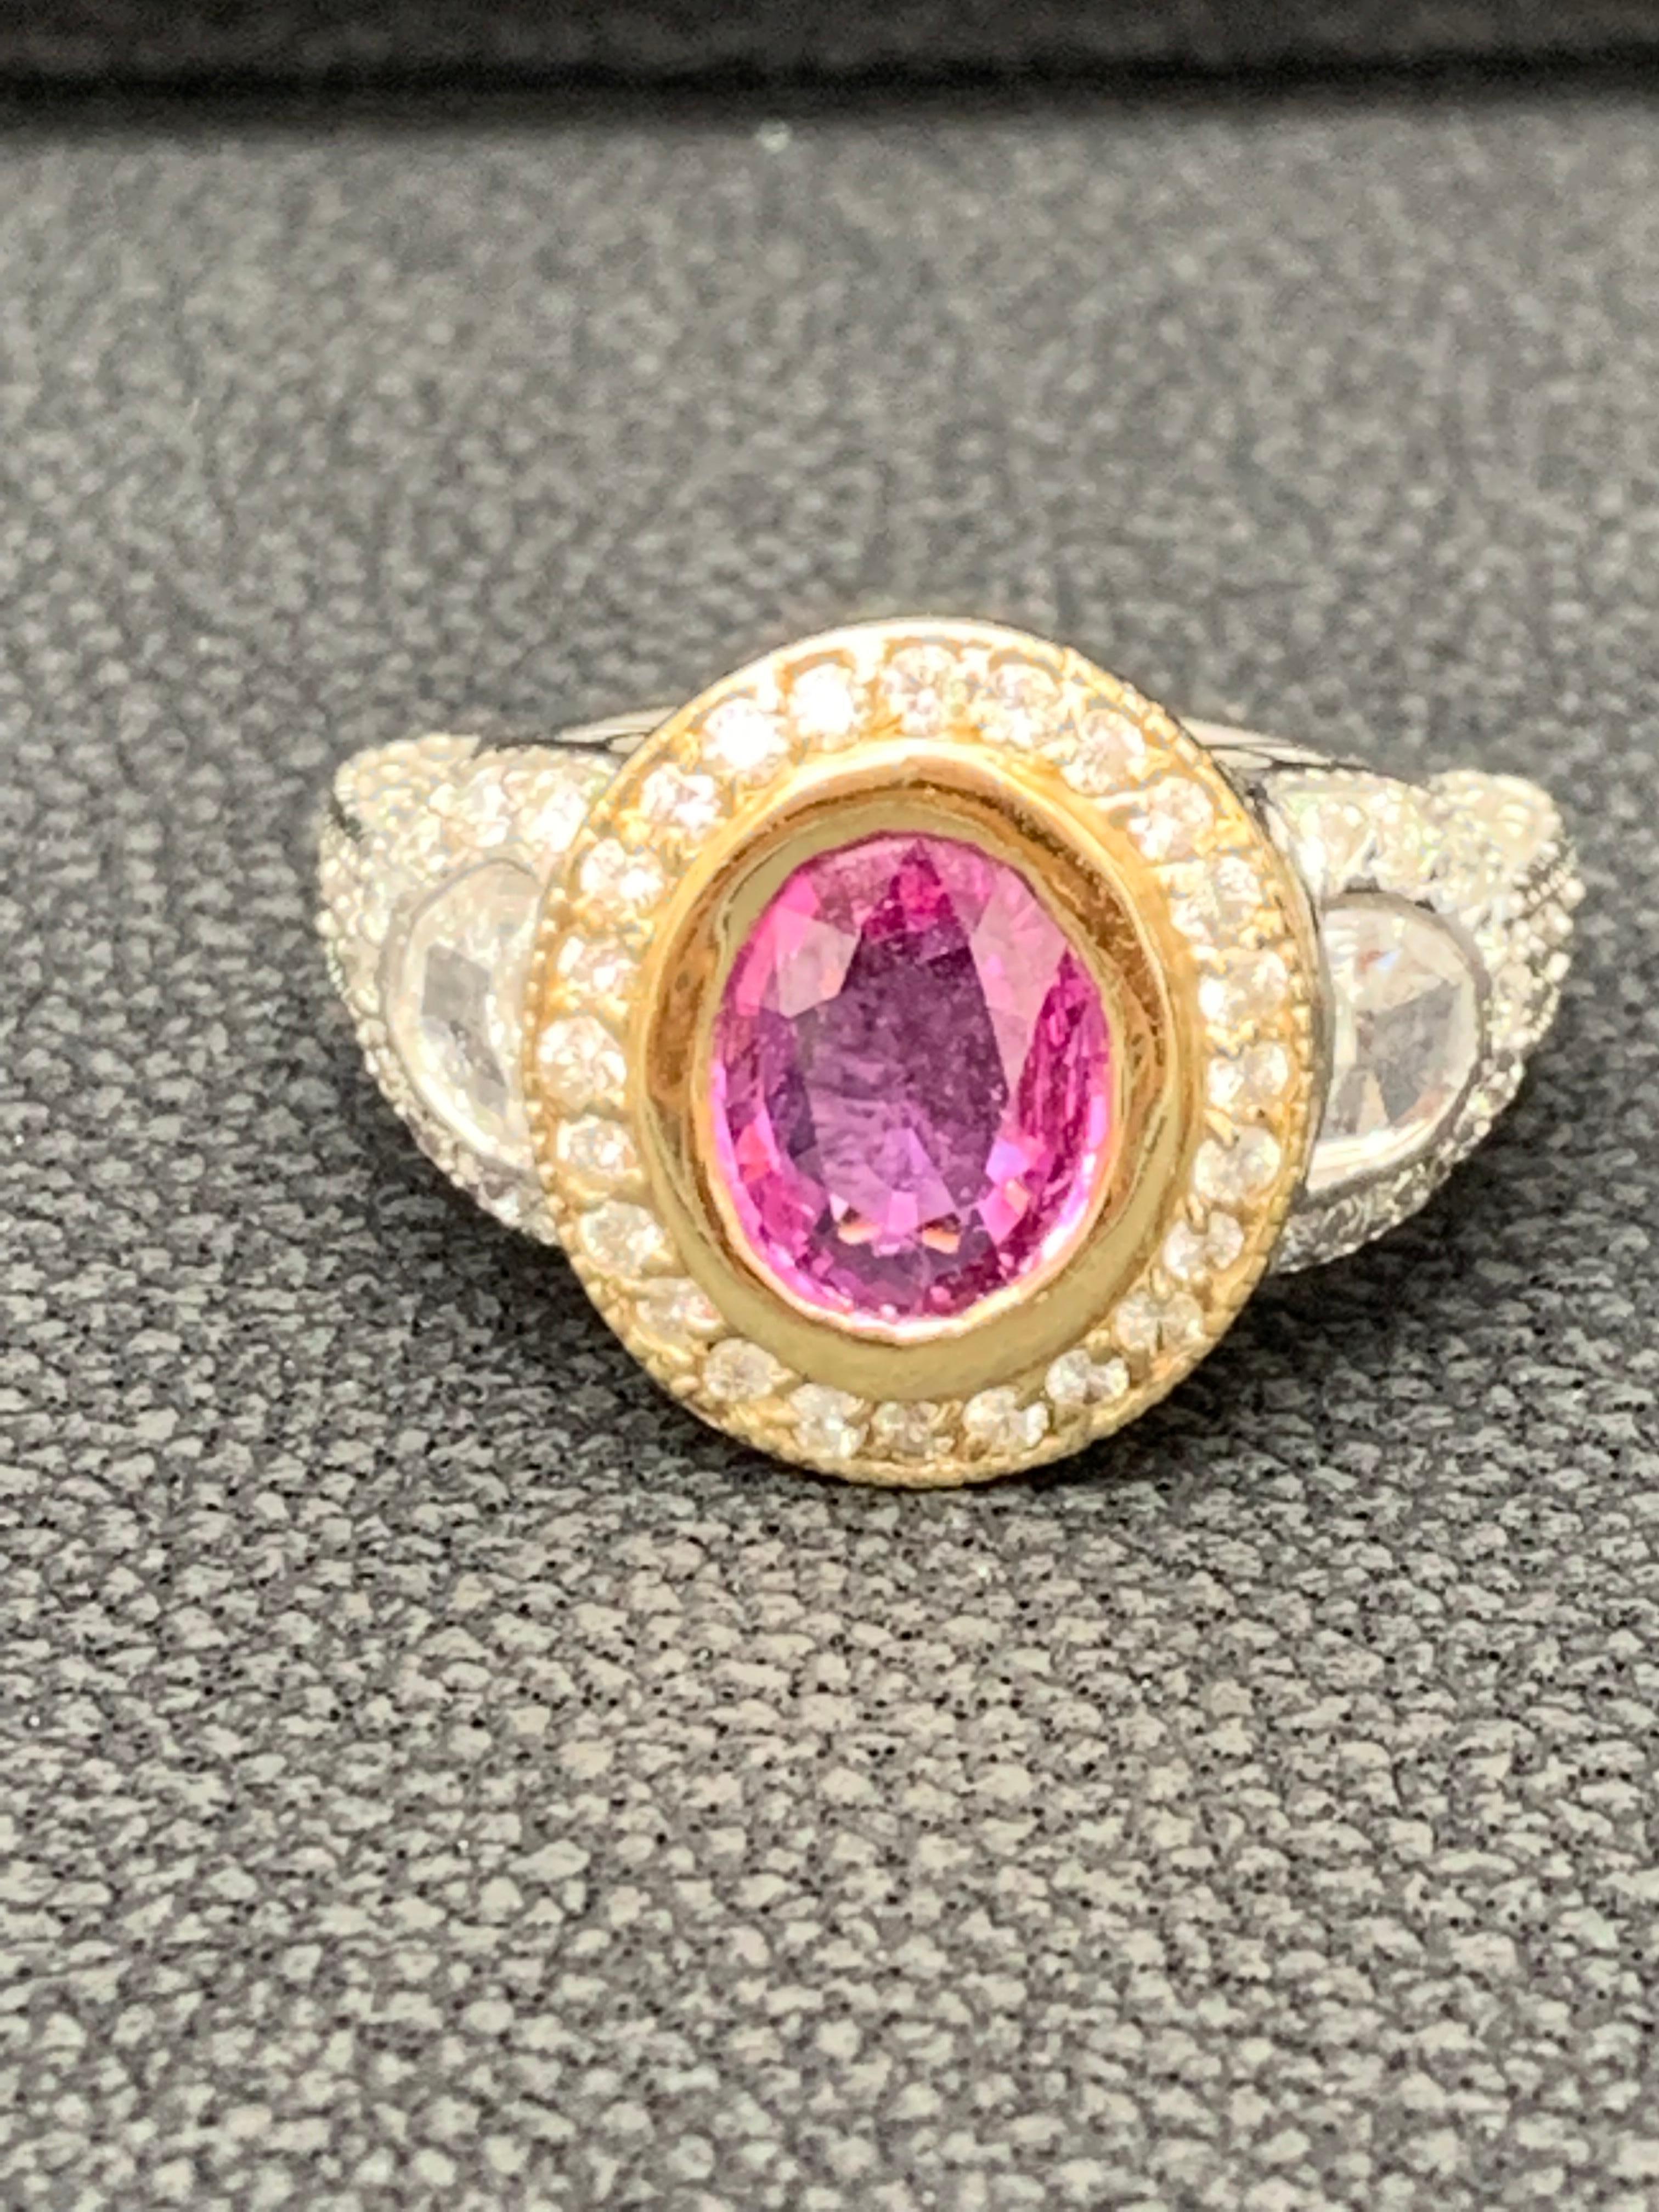 A vibrant and color-rich oval cut 1.89 carat pink sapphire takes center stage as it is elegantly set in a diamond encrusted halo in Yellow Gold and is accented with epaulette diamonds on each side.  Diamonds weigh 0.99 carats total. A magnificent